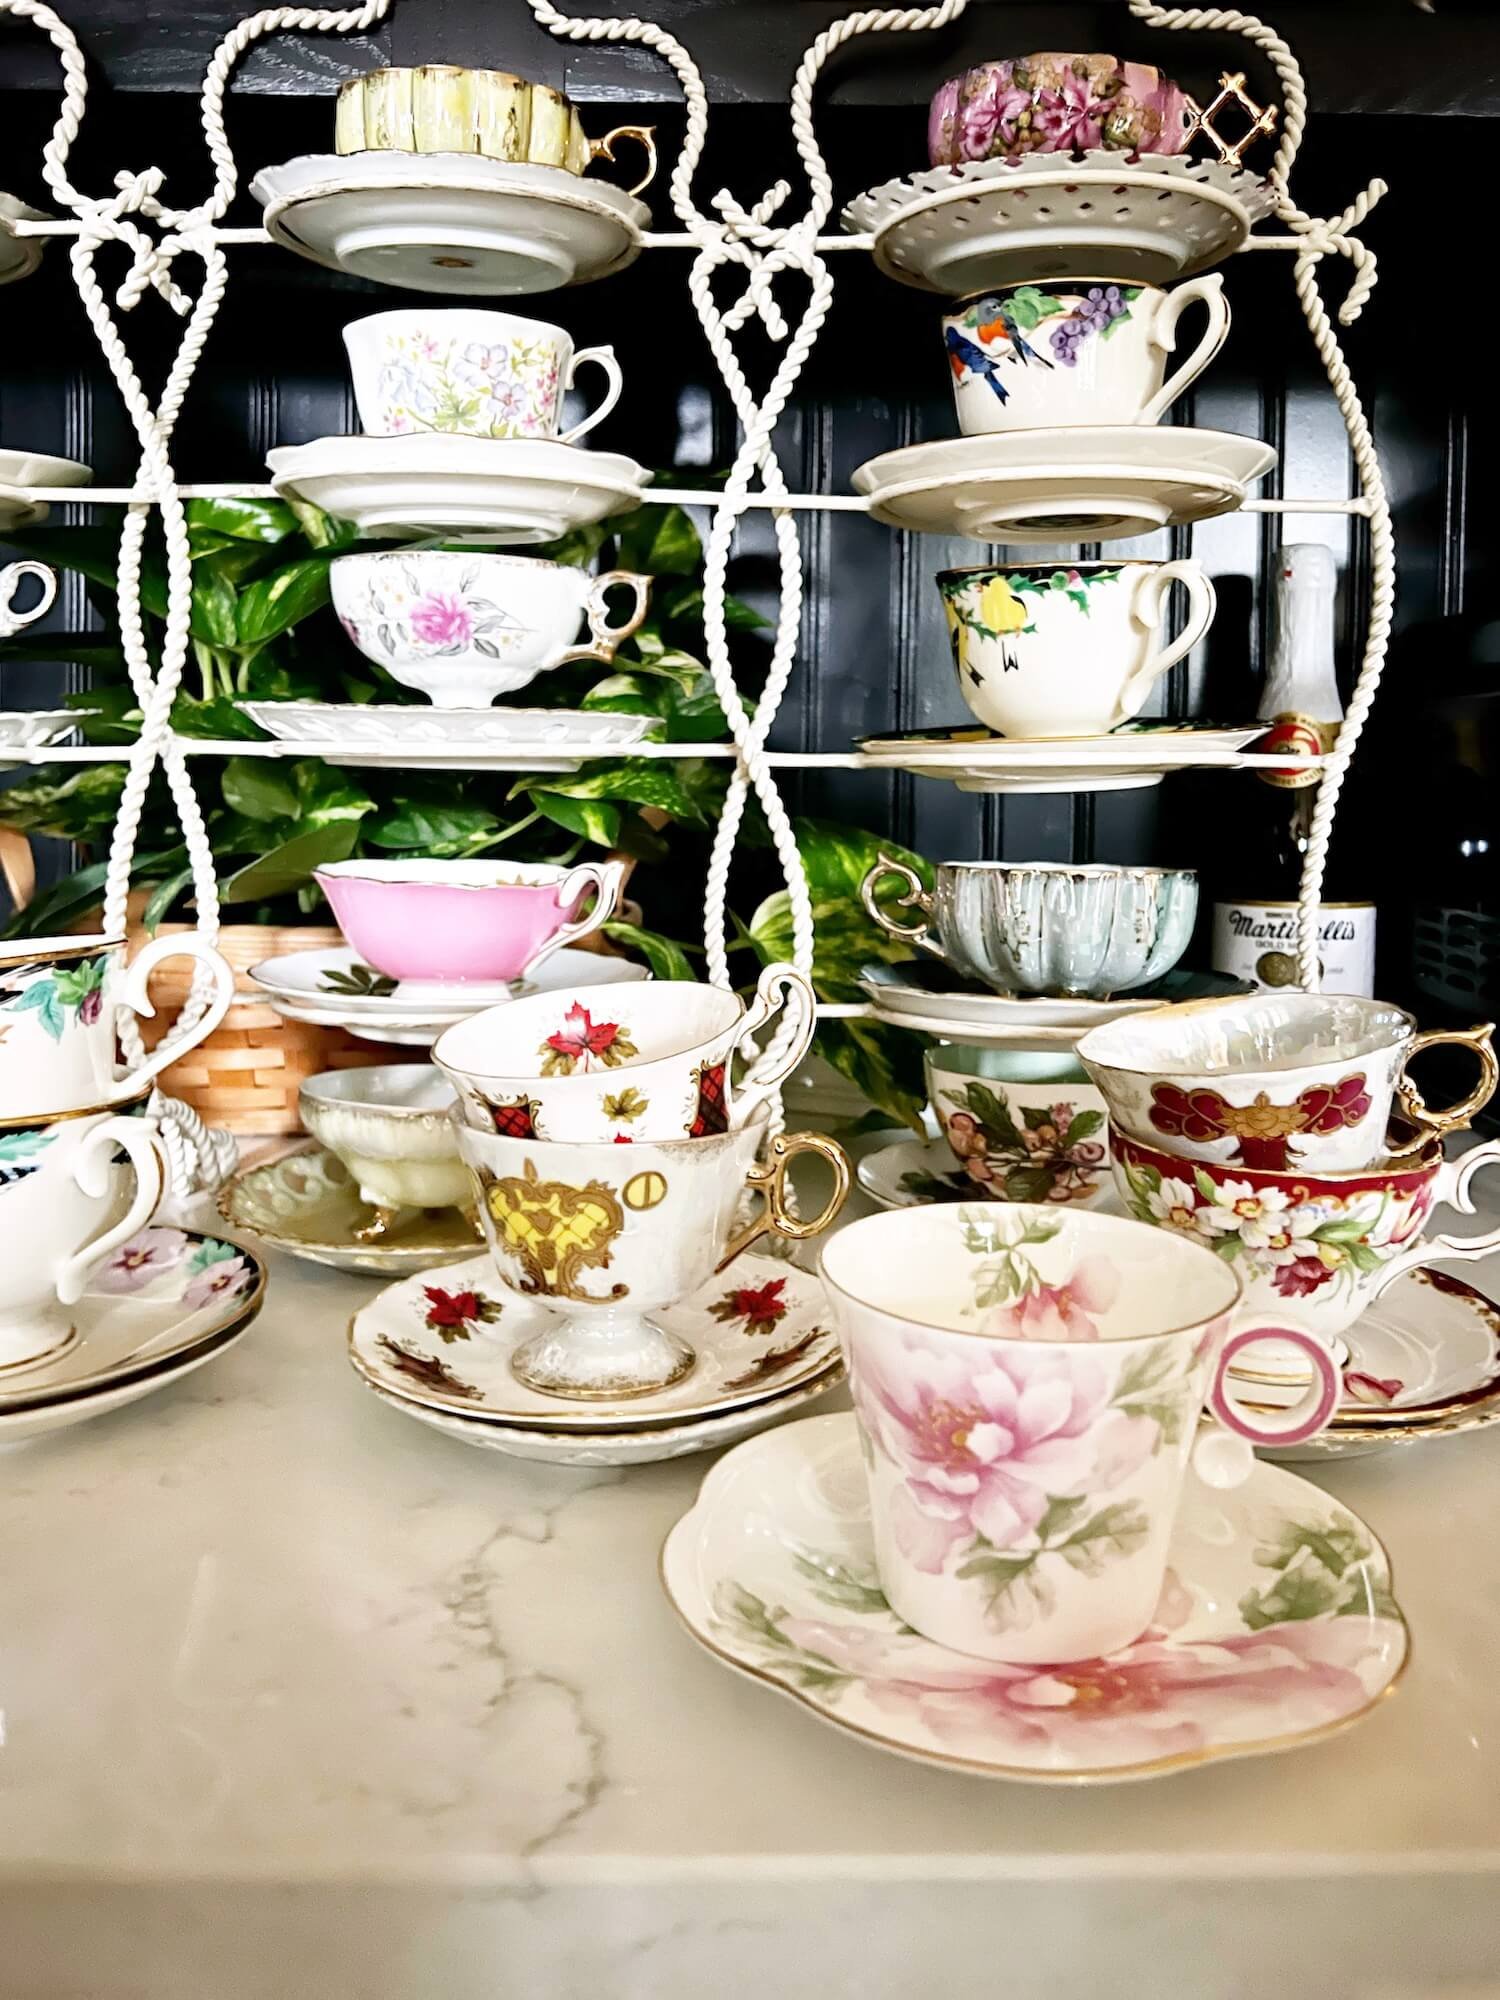 teacups ready to party.JPG